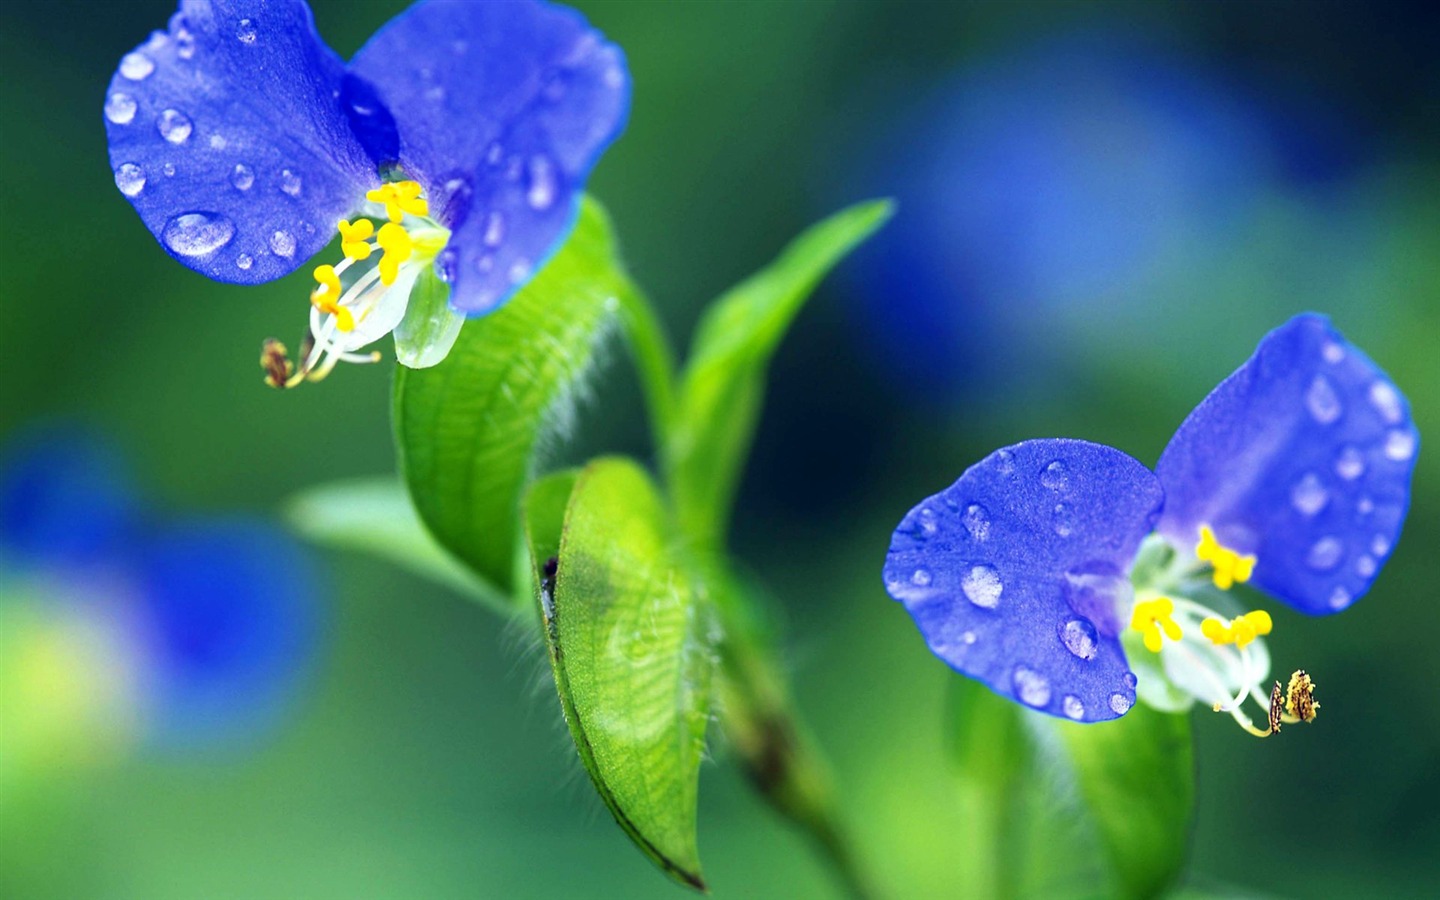 Pairs of flowers and green leaves wallpaper (2) #10 - 1440x900